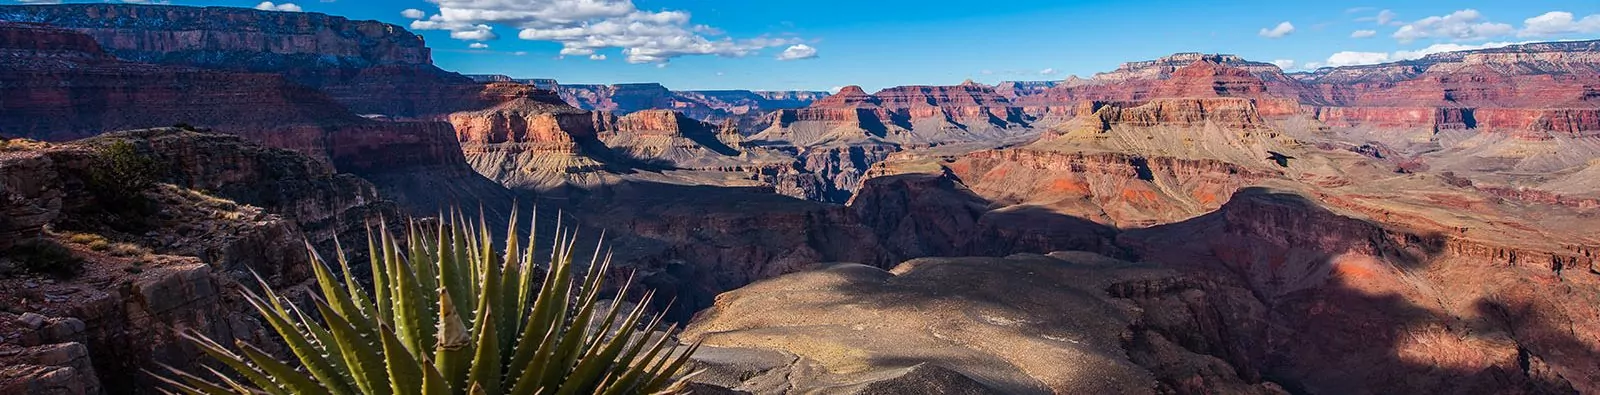 View from the Tonto Plateau in Grand Canyon, Arizona